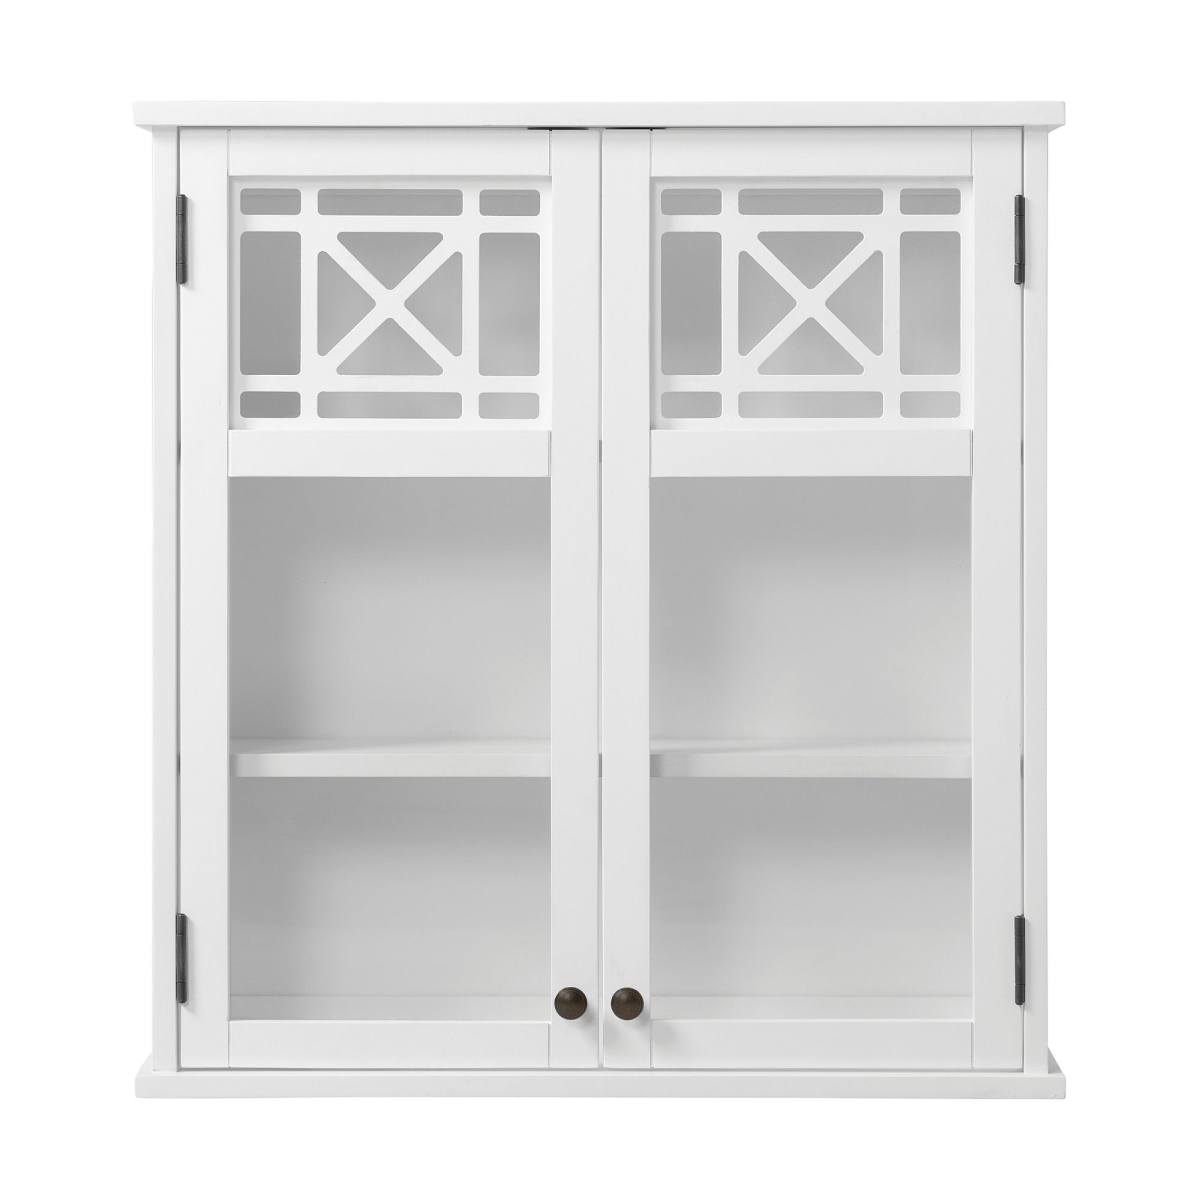 Picture of Alaterre ANDE76WH 27 x 29 in. Derby Wall Mounted Bath Storage Cabinet with Glass Cabinet Doors